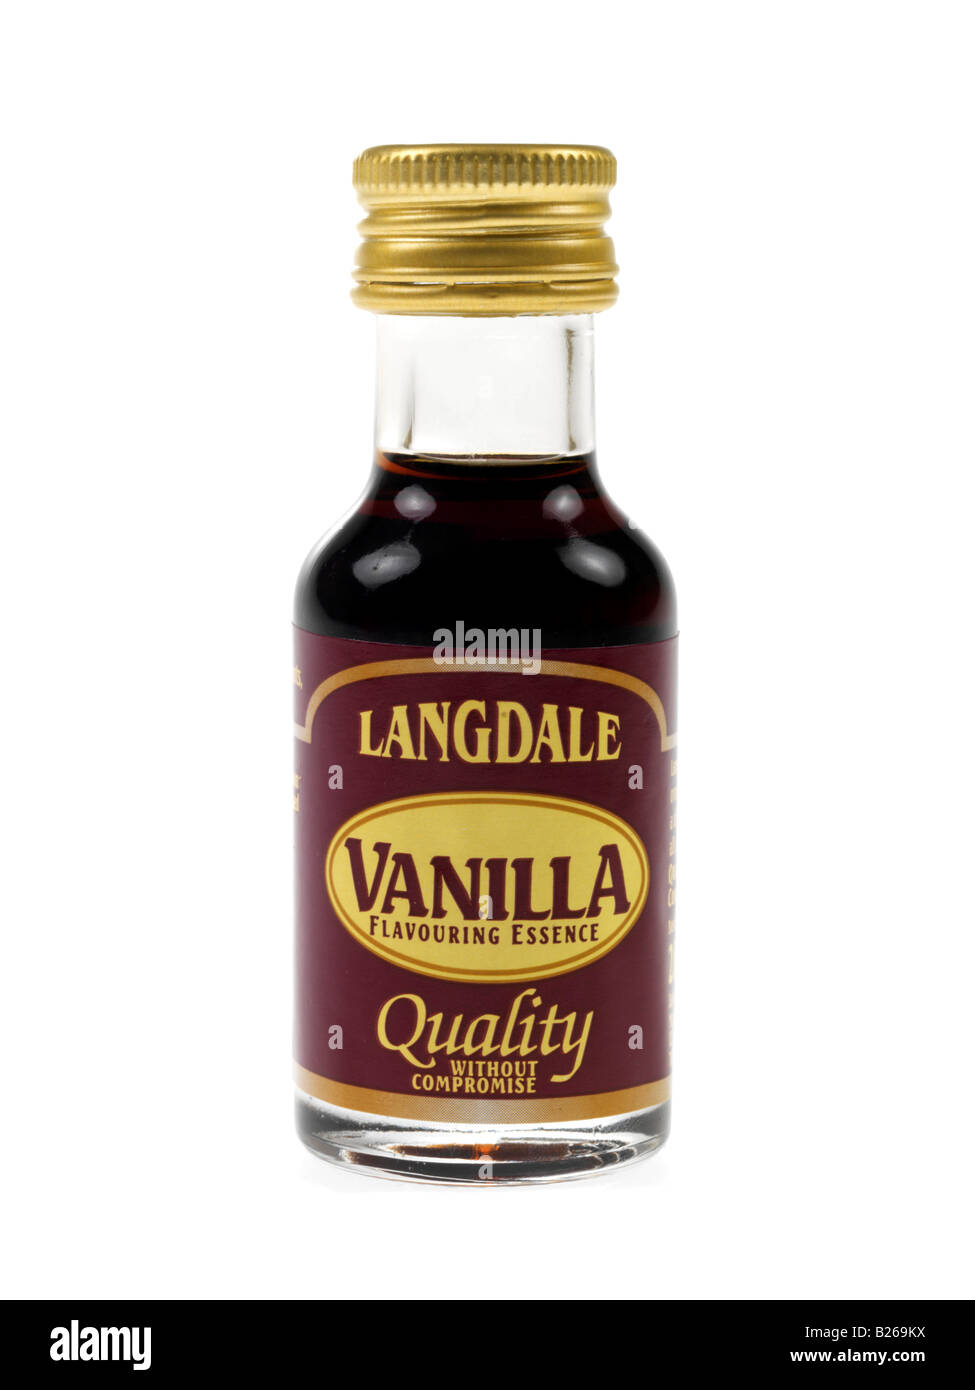 Bottles Of Langdale Food Colouring Isolated Against A White Background With A Clipping Path and No People Stock Photo